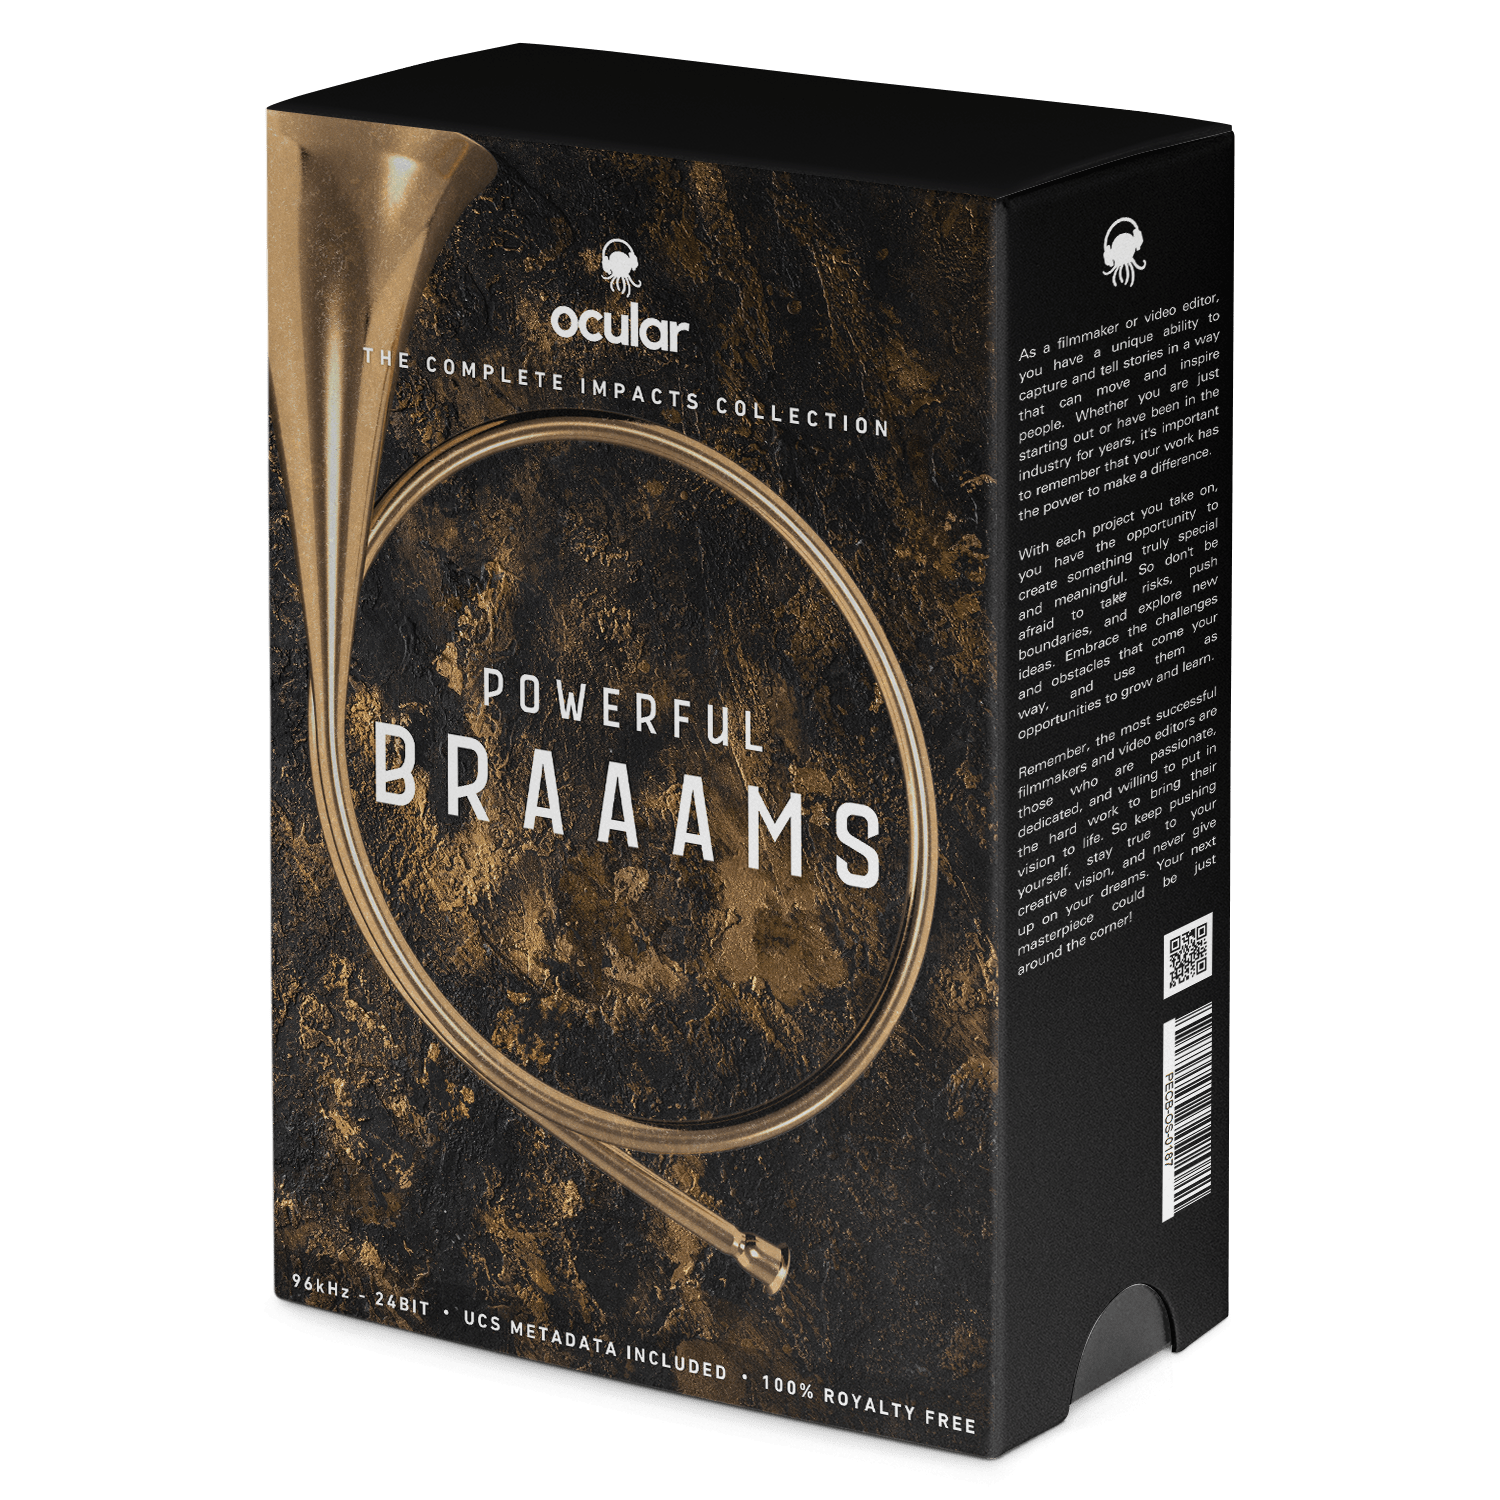 Braaams Sound FX for video editing.